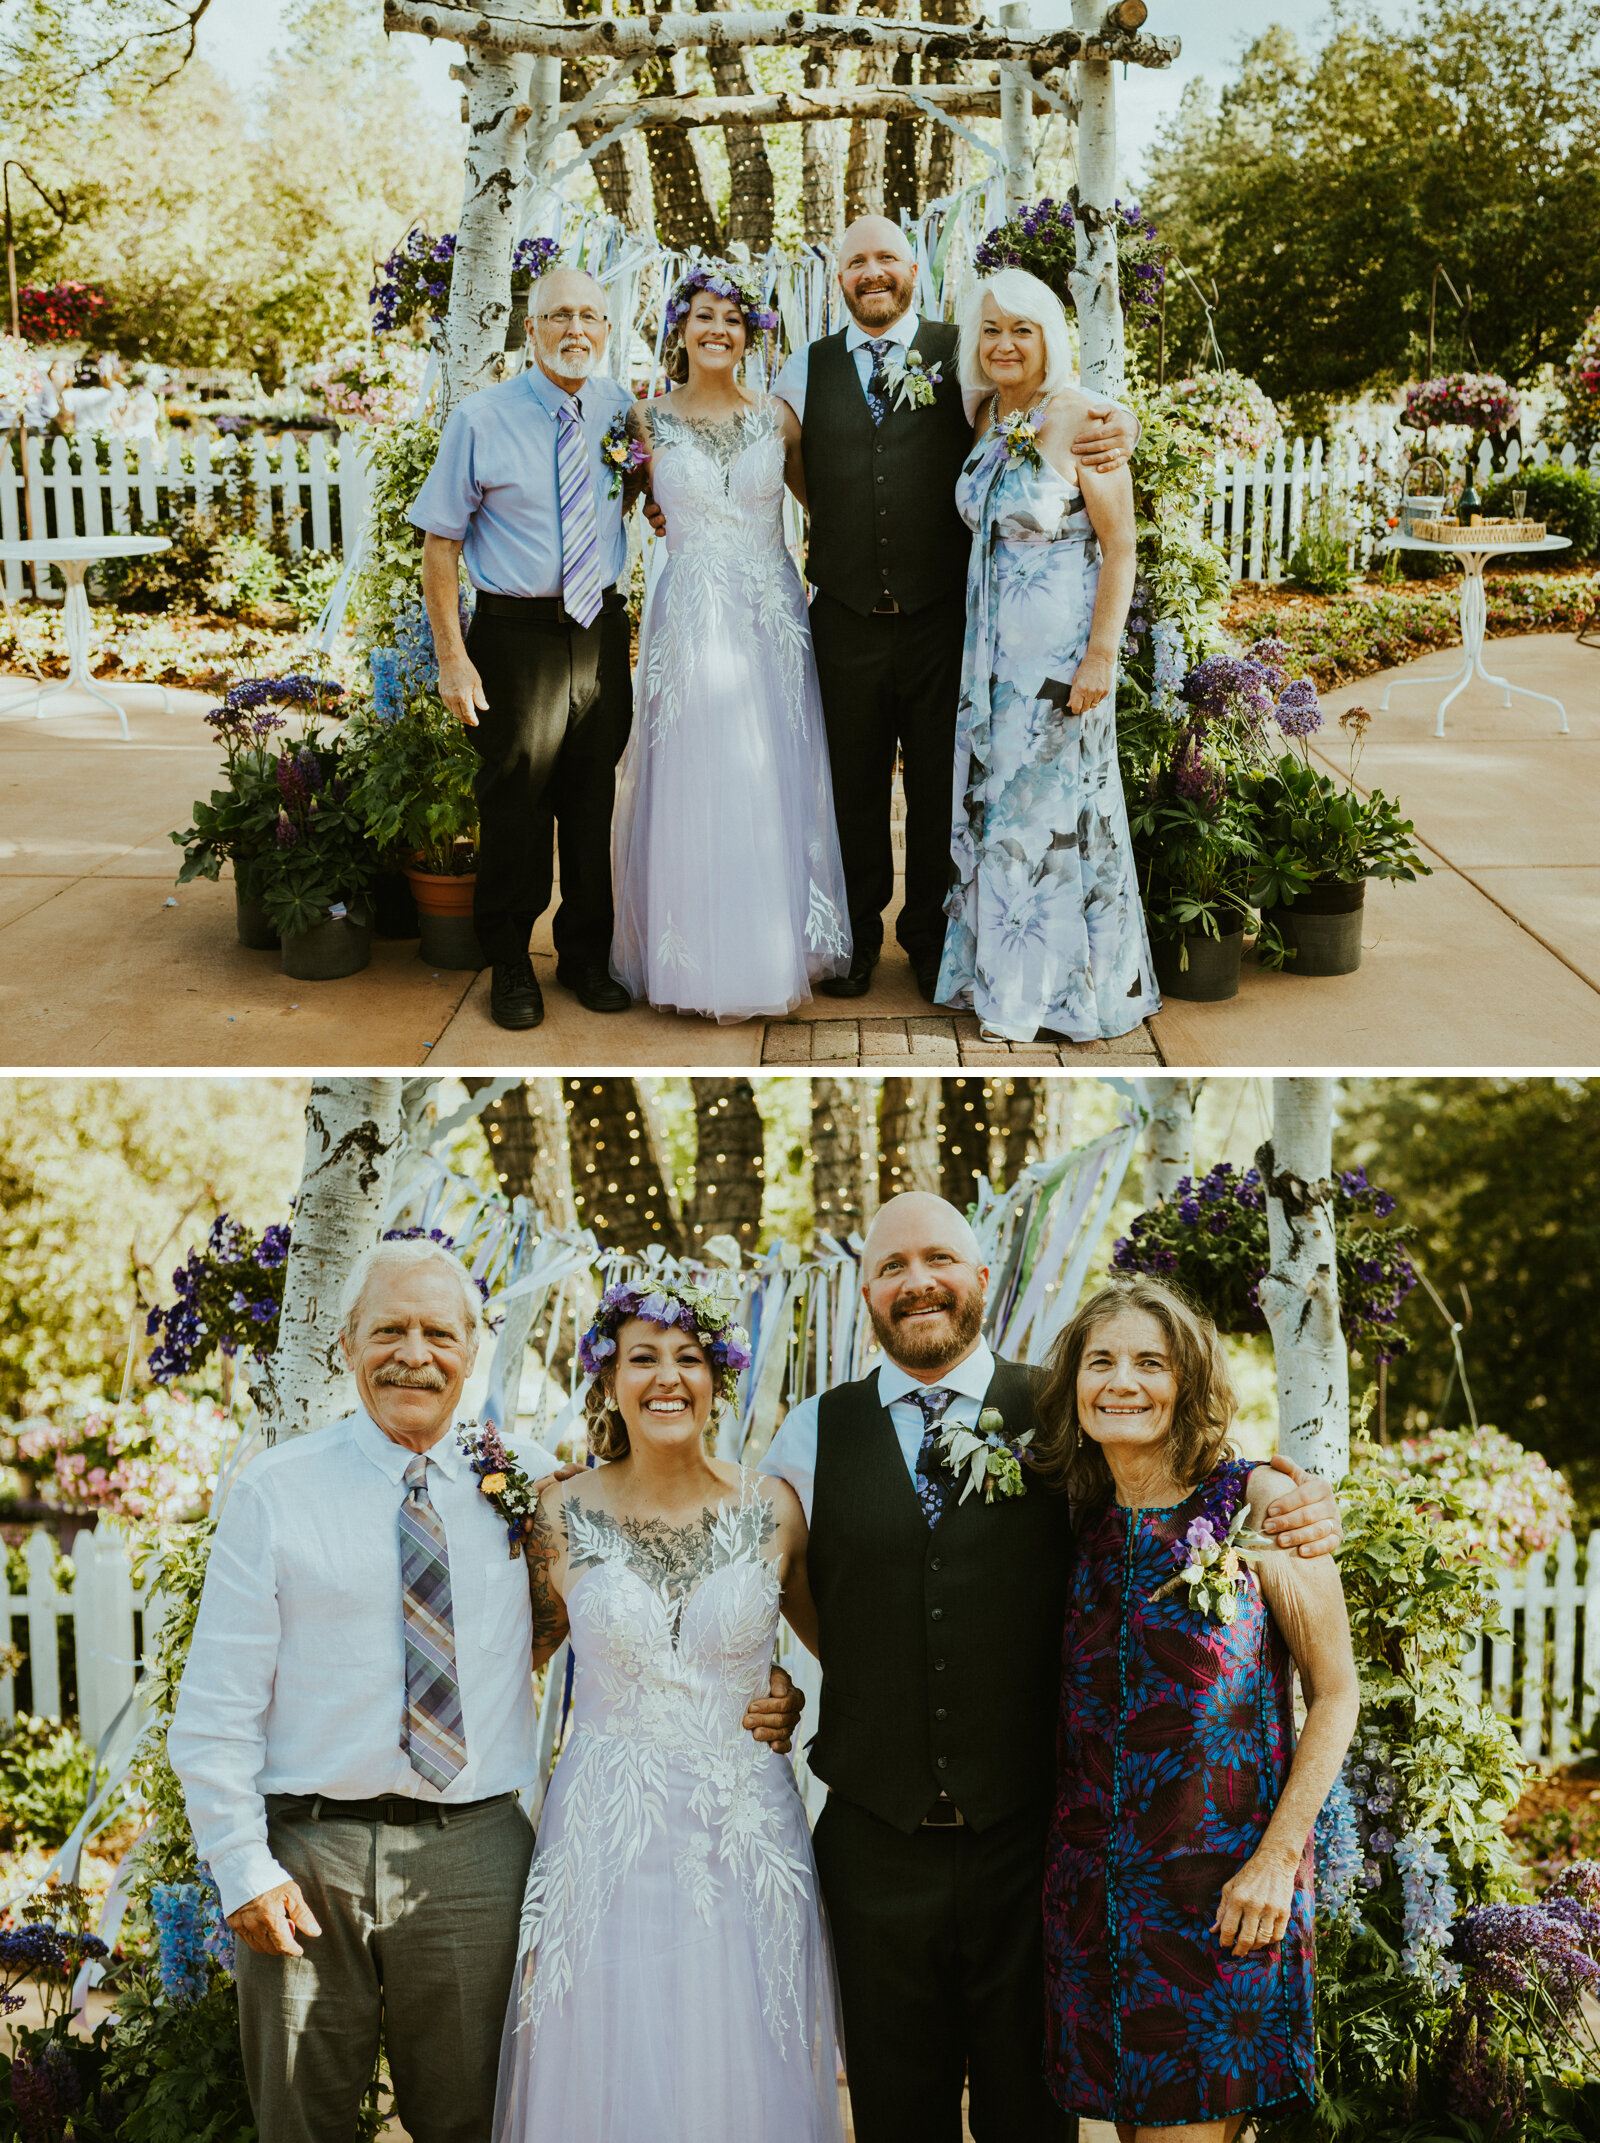 family photos with a bride an grooms parents at a summer wedding in arizona.jpg